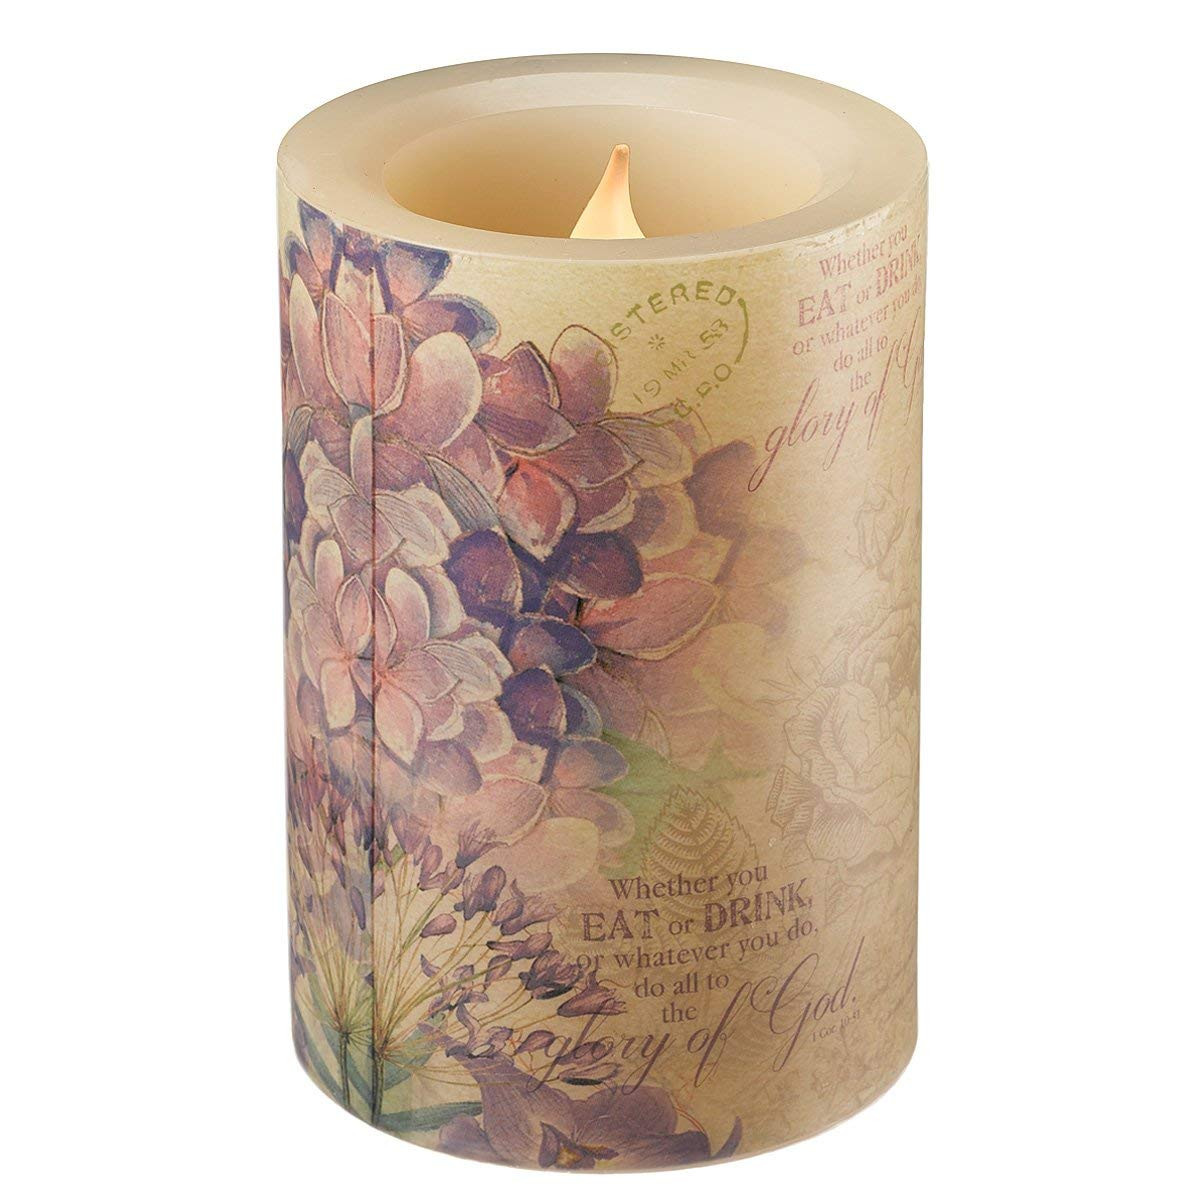 22 Nice Cylinder Candle Vase Set Of 3 2024 free download cylinder candle vase set of 3 of amazon com floral inspirations collection flickering flameless wax regarding amazon com floral inspirations collection flickering flameless wax pillar candle